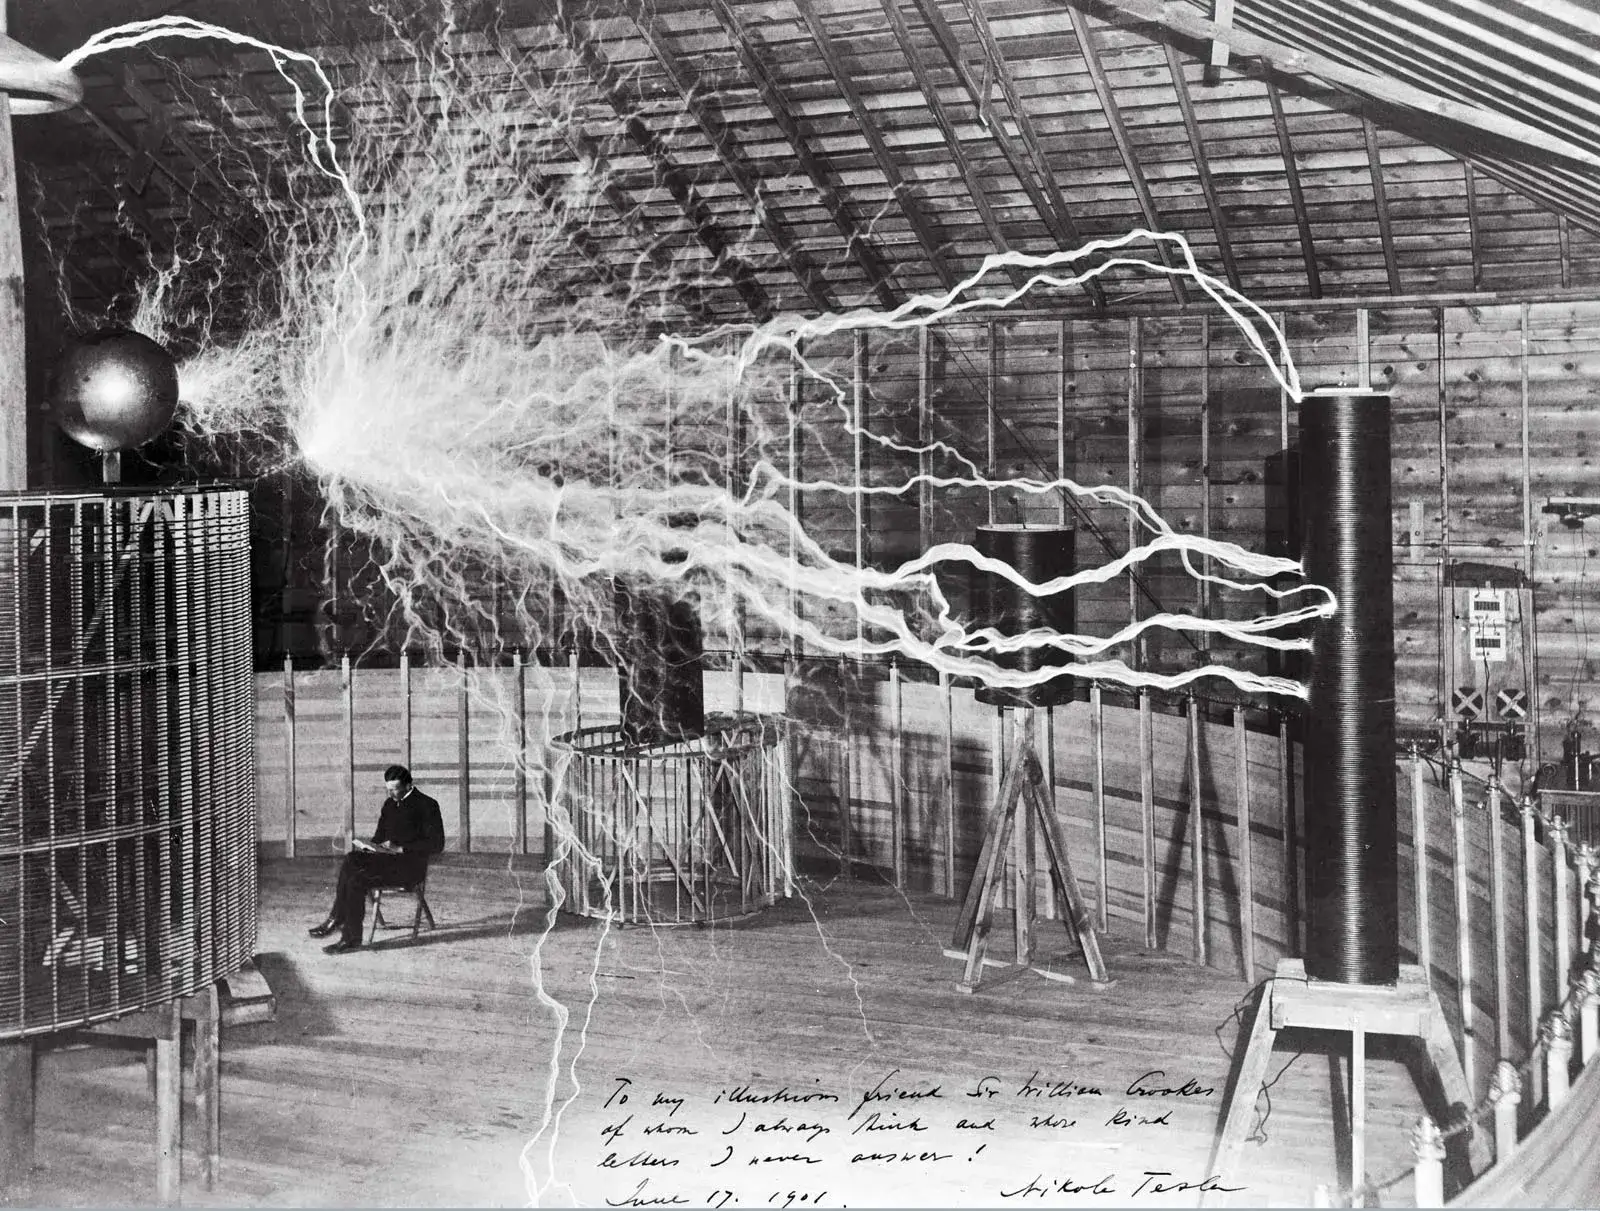 Publicity photo of Nikola Tesla in his laboratory in Colorado Springs, Colorado, in December 1899. Tesla posed with his “magnifying transmitter,” which was capable of producing millions of volts of electricity. The discharge shown is 6.7 metres (22 feet) in length.